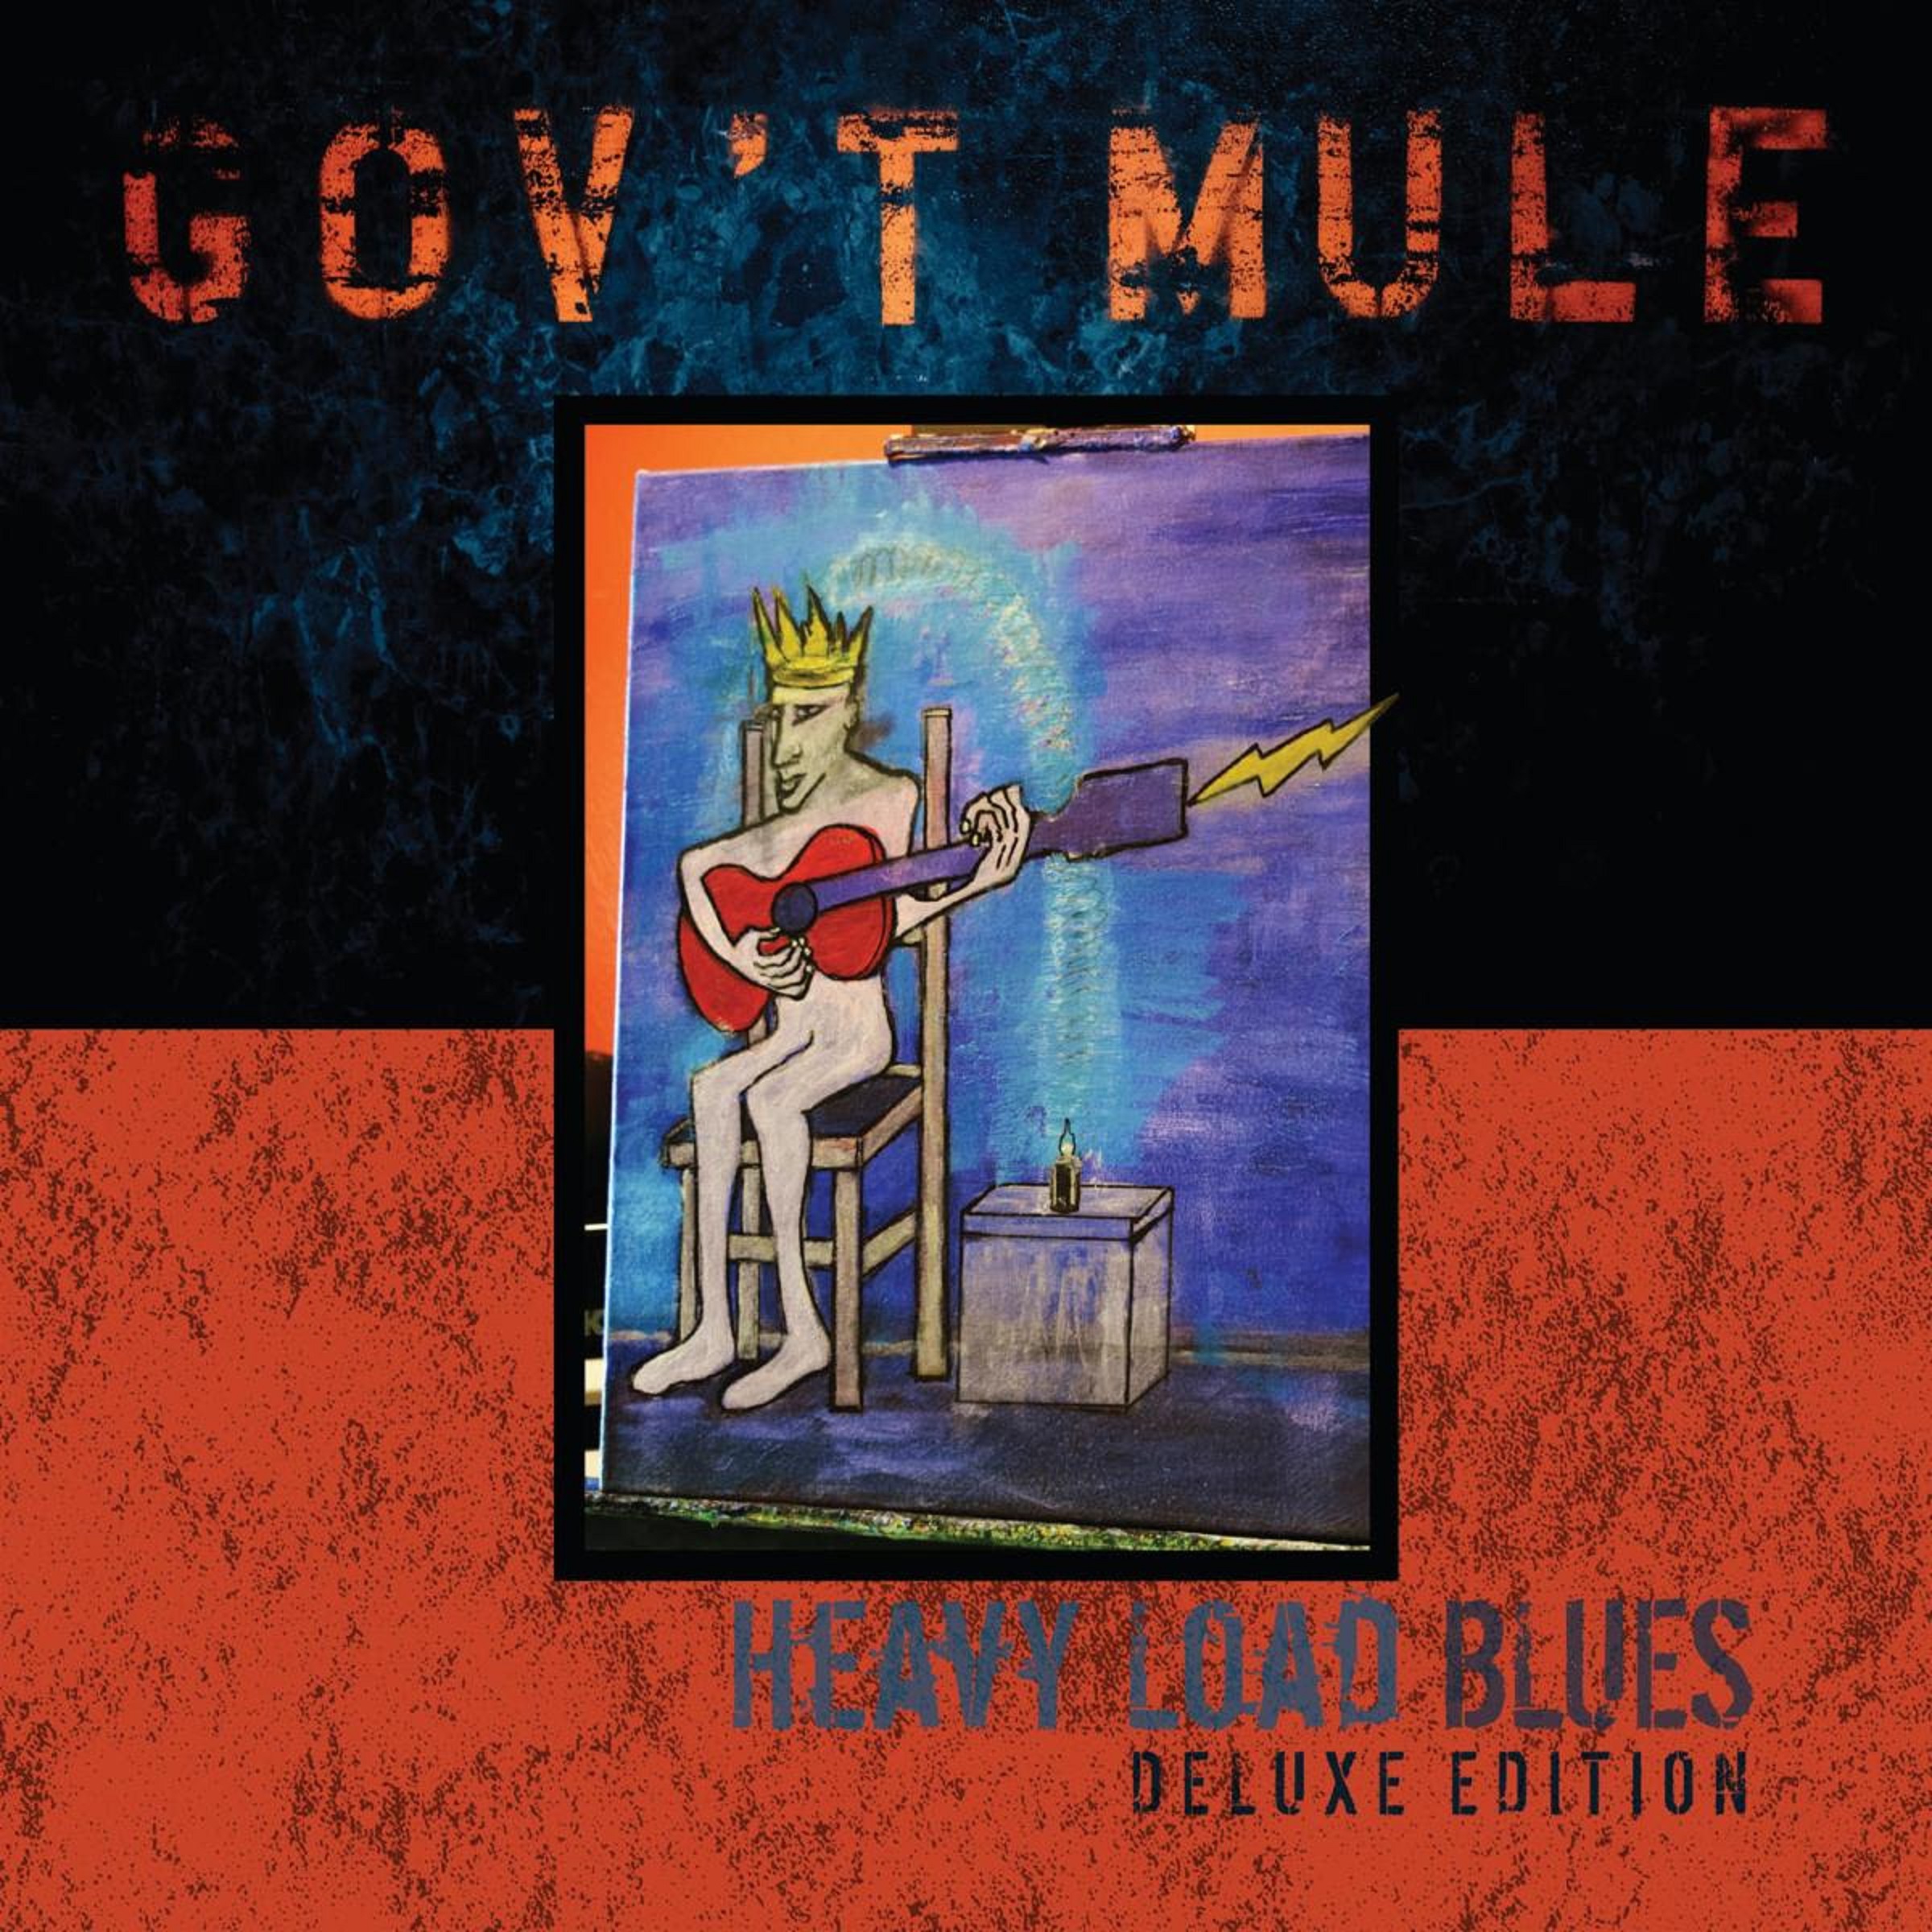 Gov’t Mule Announces Deluxe Version of 'Heavy Load Blues' To Be